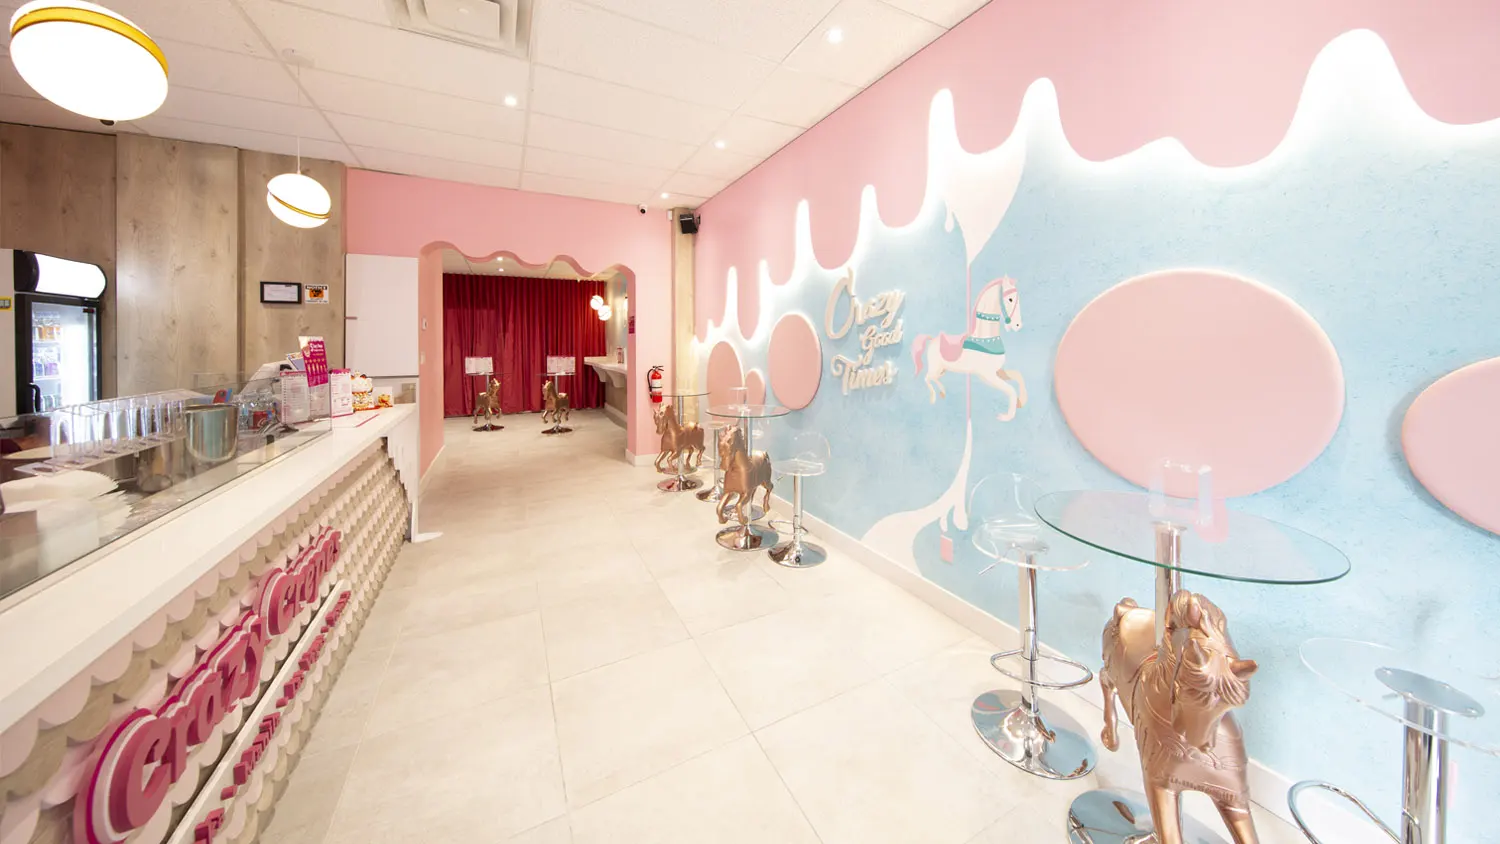 Interior design project for Crazy Crepes. Designed the store create a fantastical atmosphere with camera-ready installations